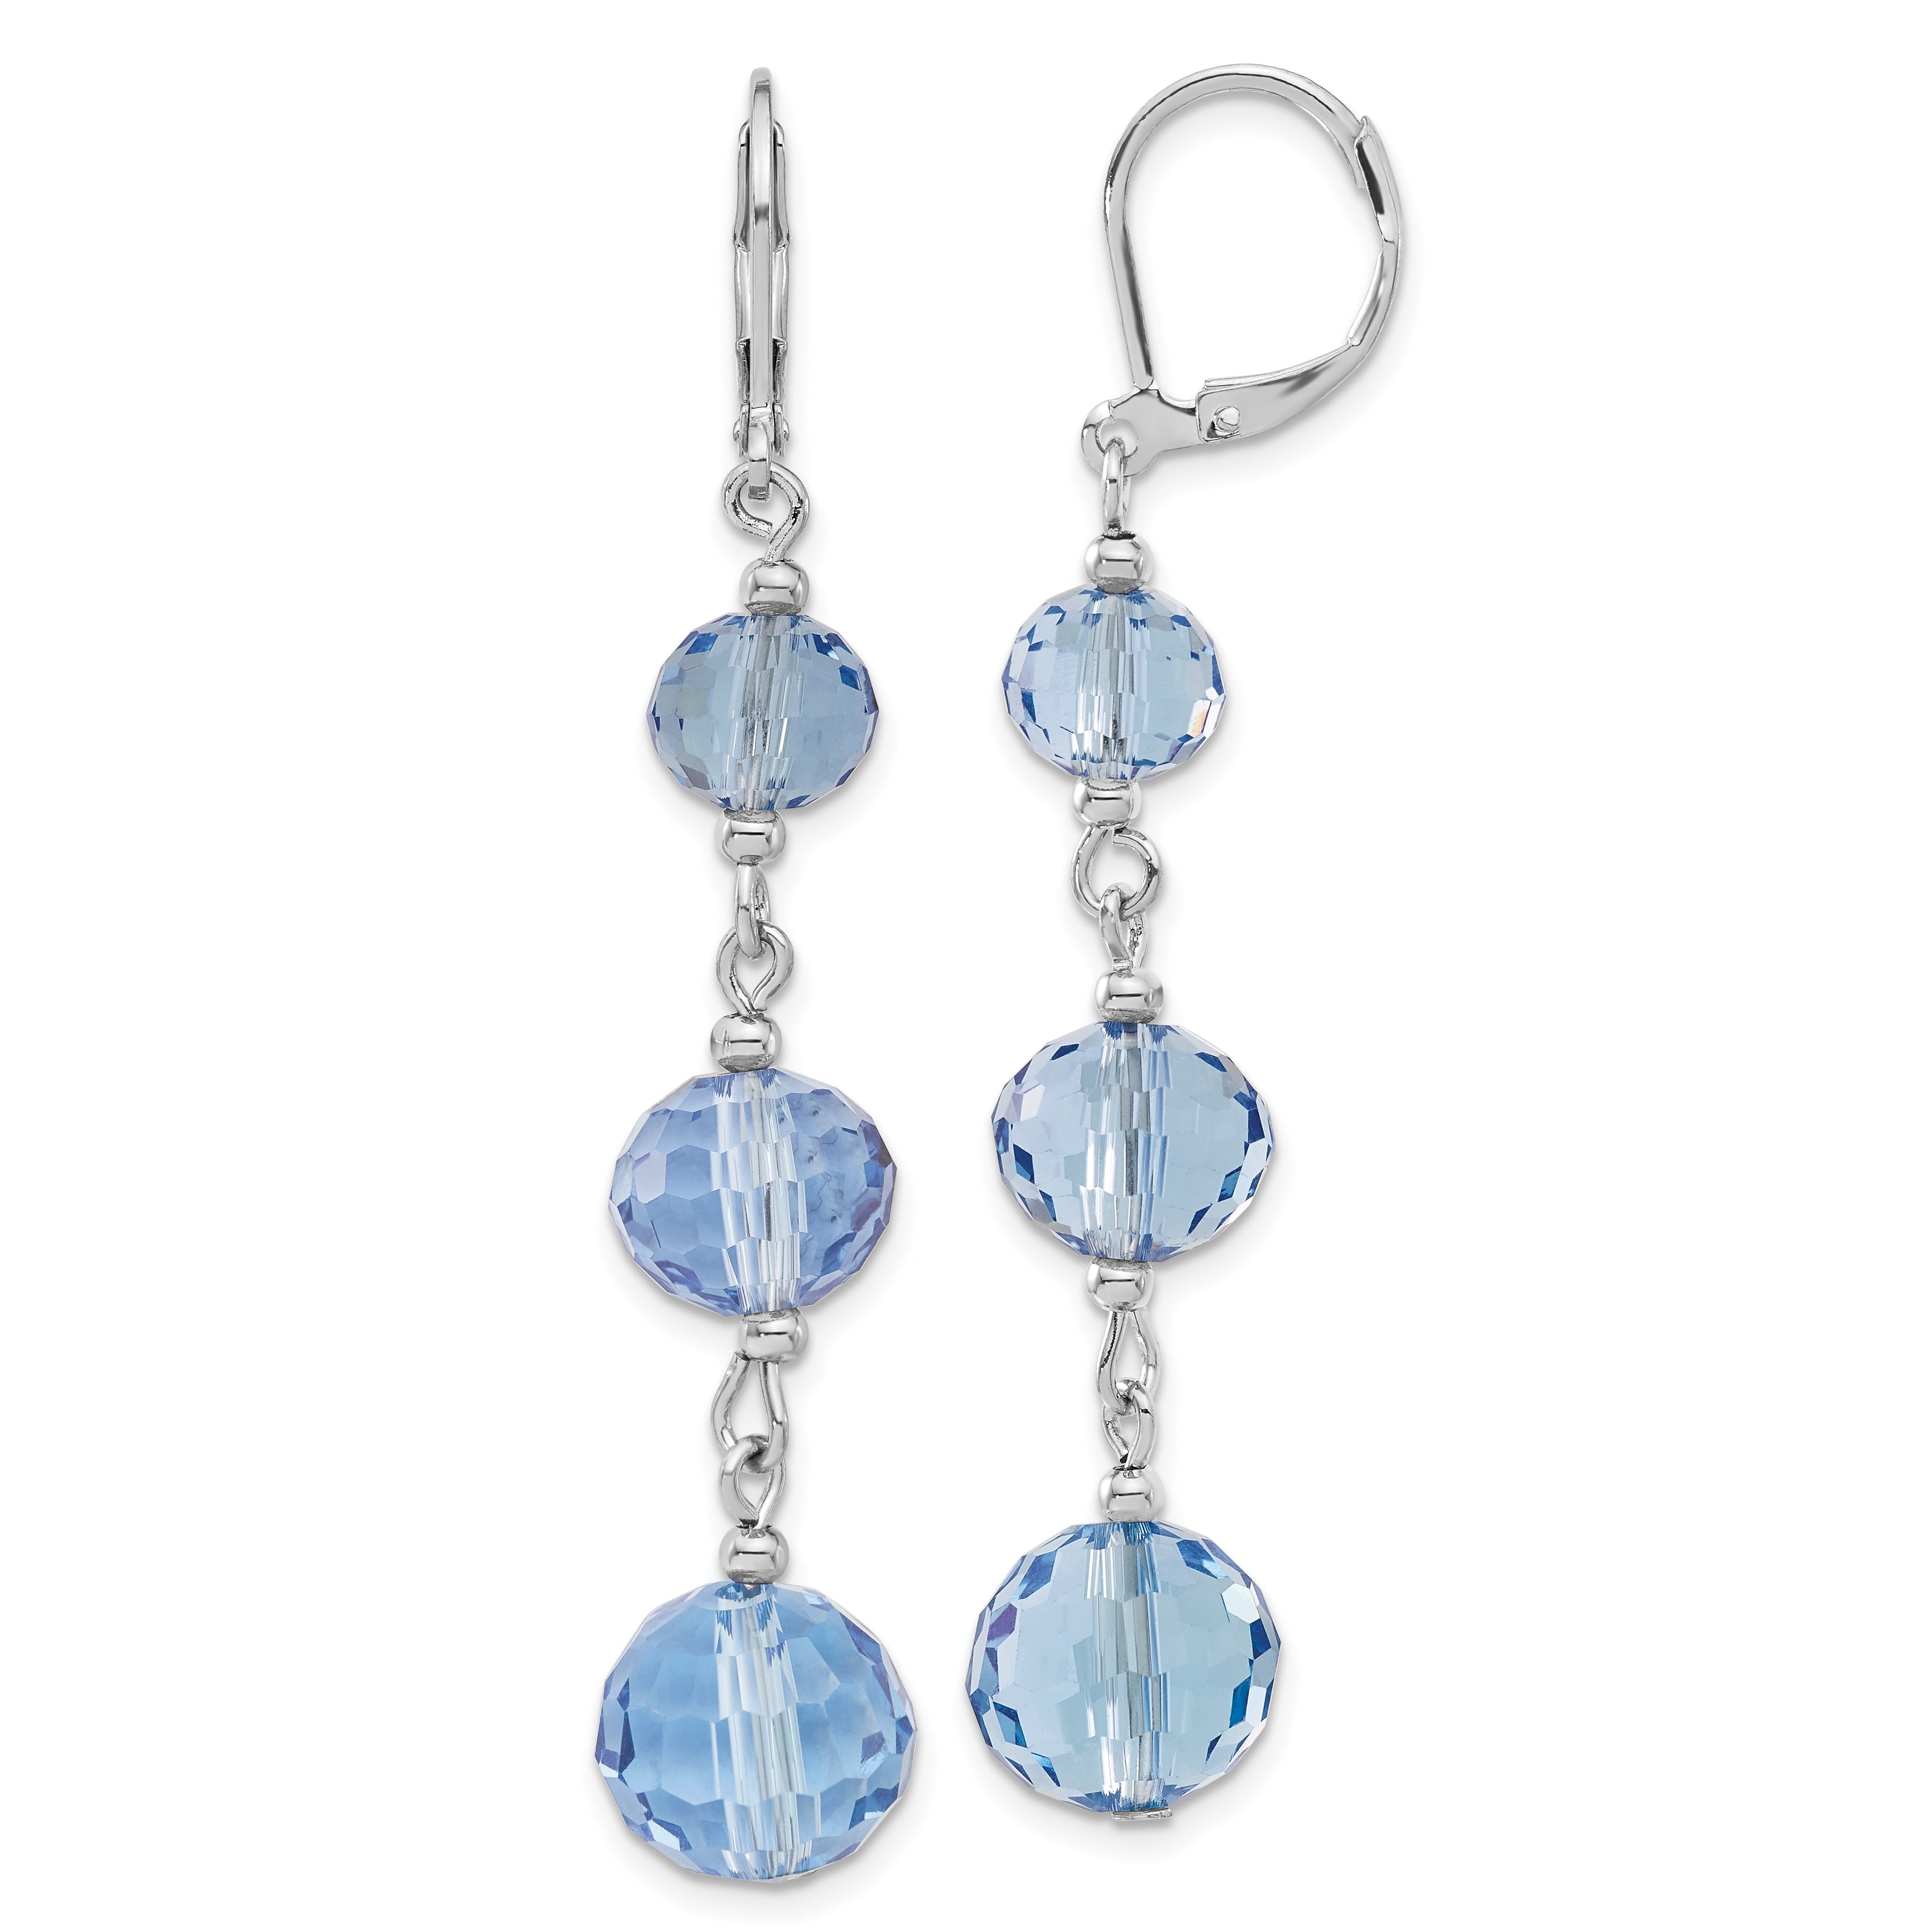 1928 Jewelry Silver-tone Graduated Light Blue Glass Faceted Beads Dangle Leverback Earrings